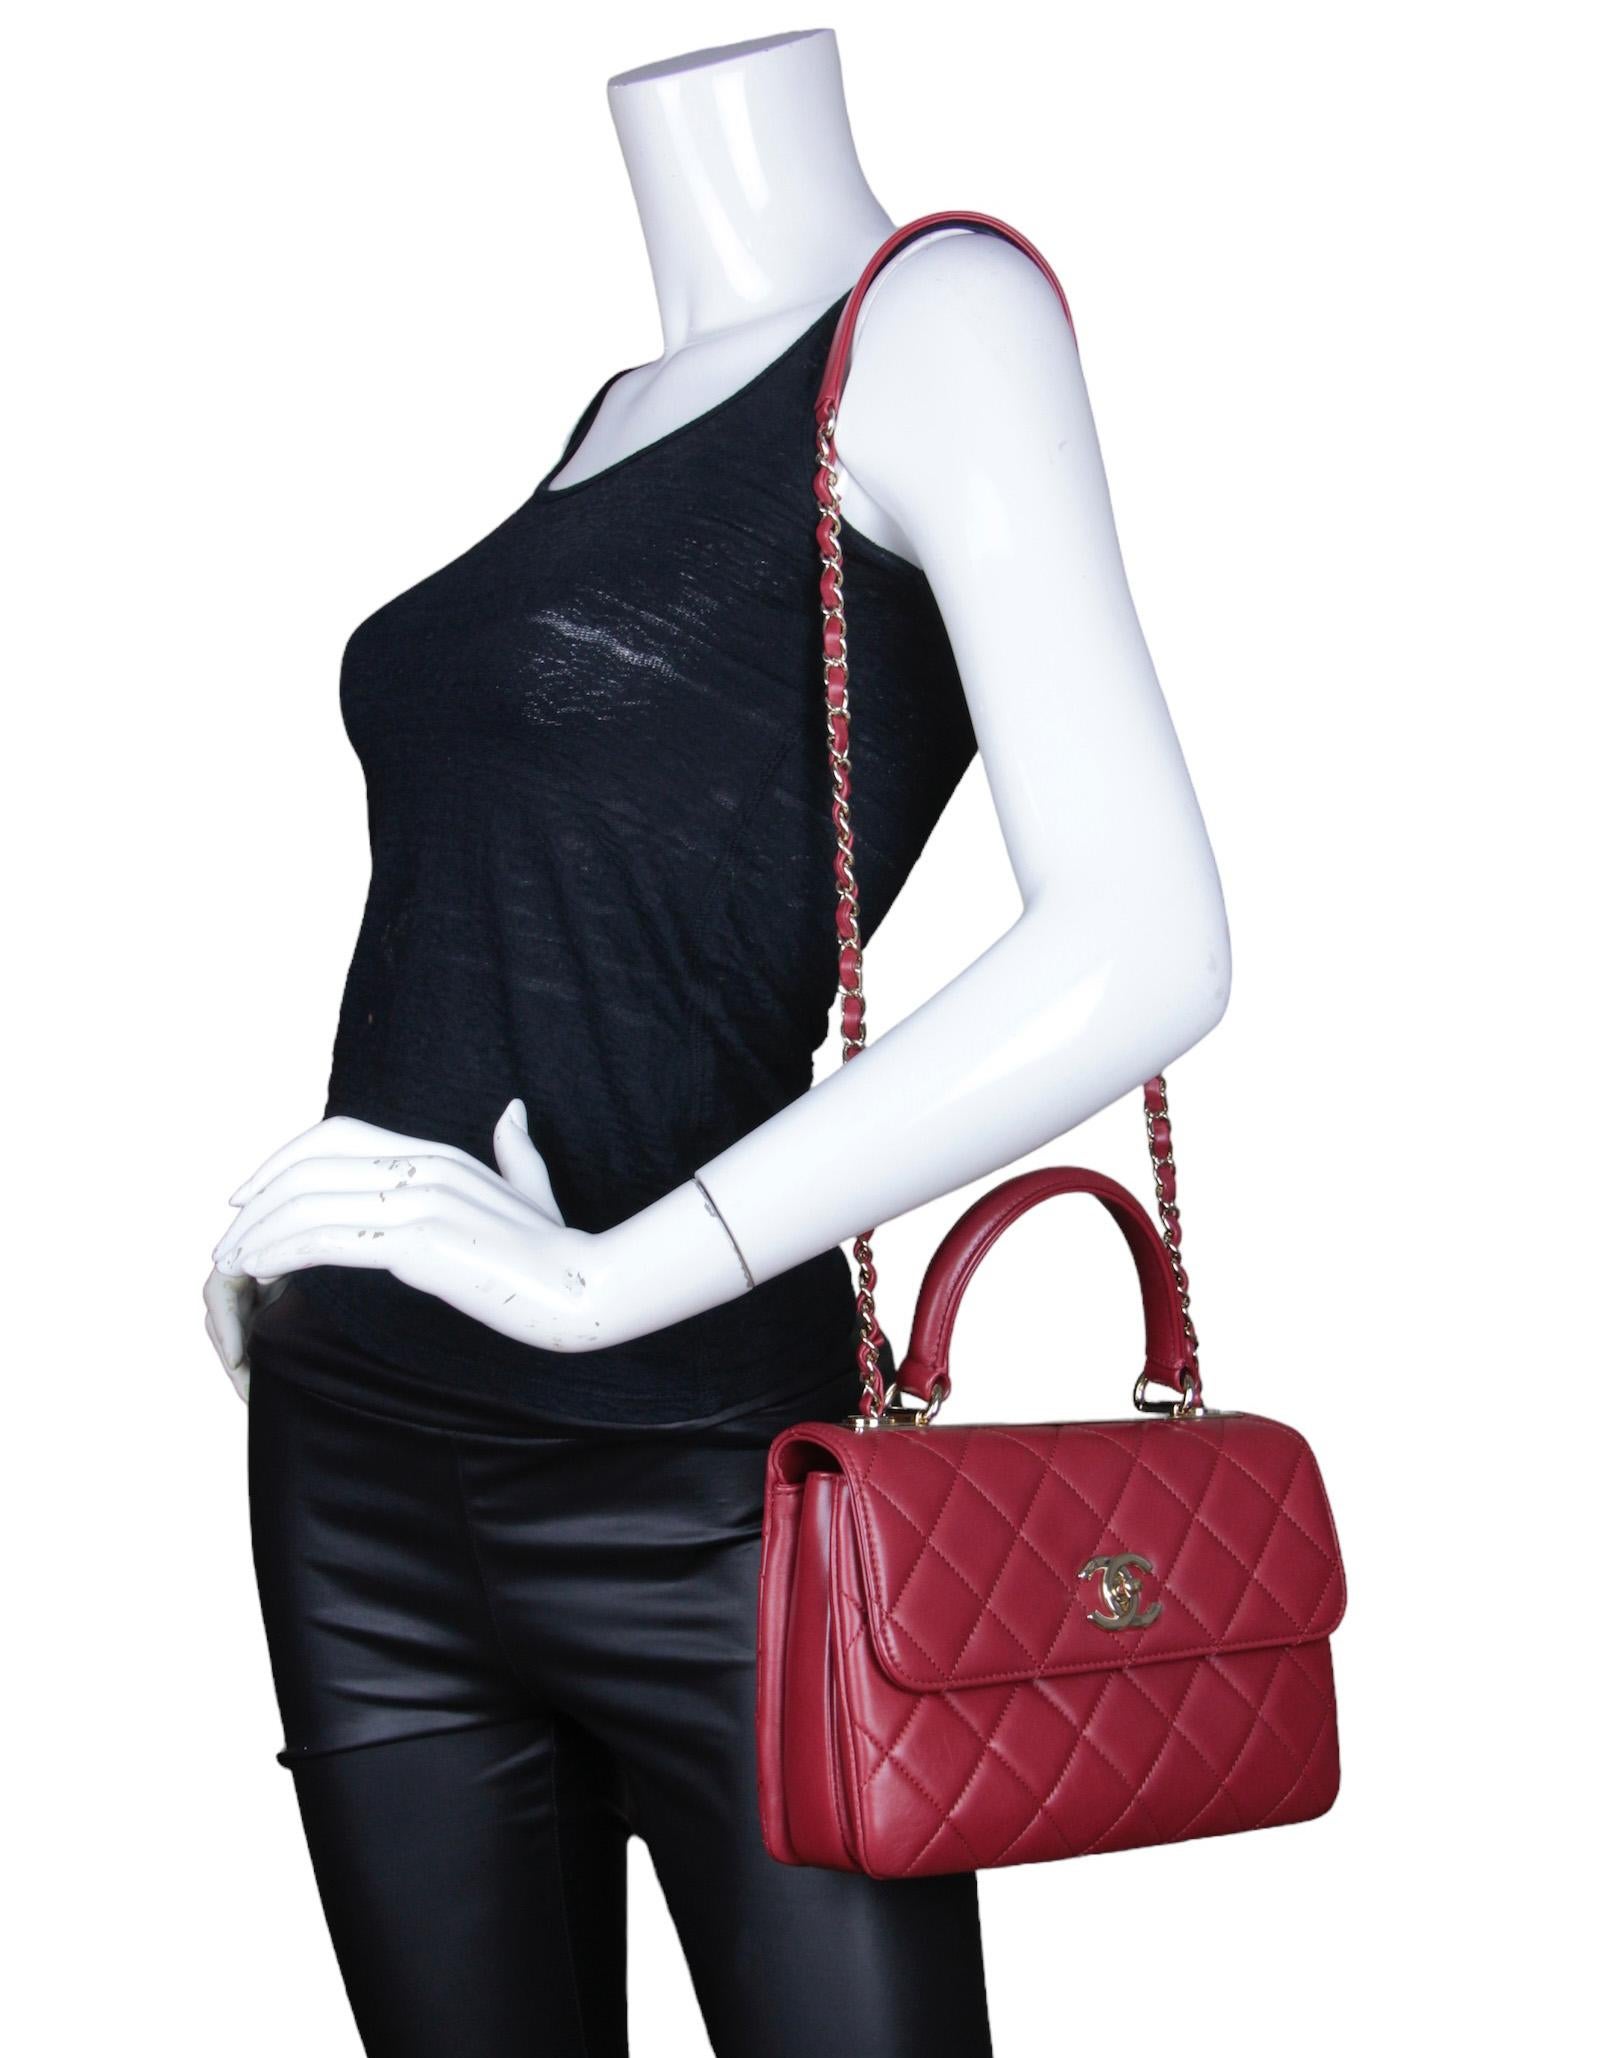 Chanel Burgundy Lambskin Quilted Trendy CC Dual Handle Flap Bag

Made In: Italy
Year of Production: 2017
Color: Burgundy 
Hardware: Goldtone
Materials: Lambskin
Lining: Burgundy leather 
Closure/Opening: Flap top with CC twistlock
Exterior Pockets: